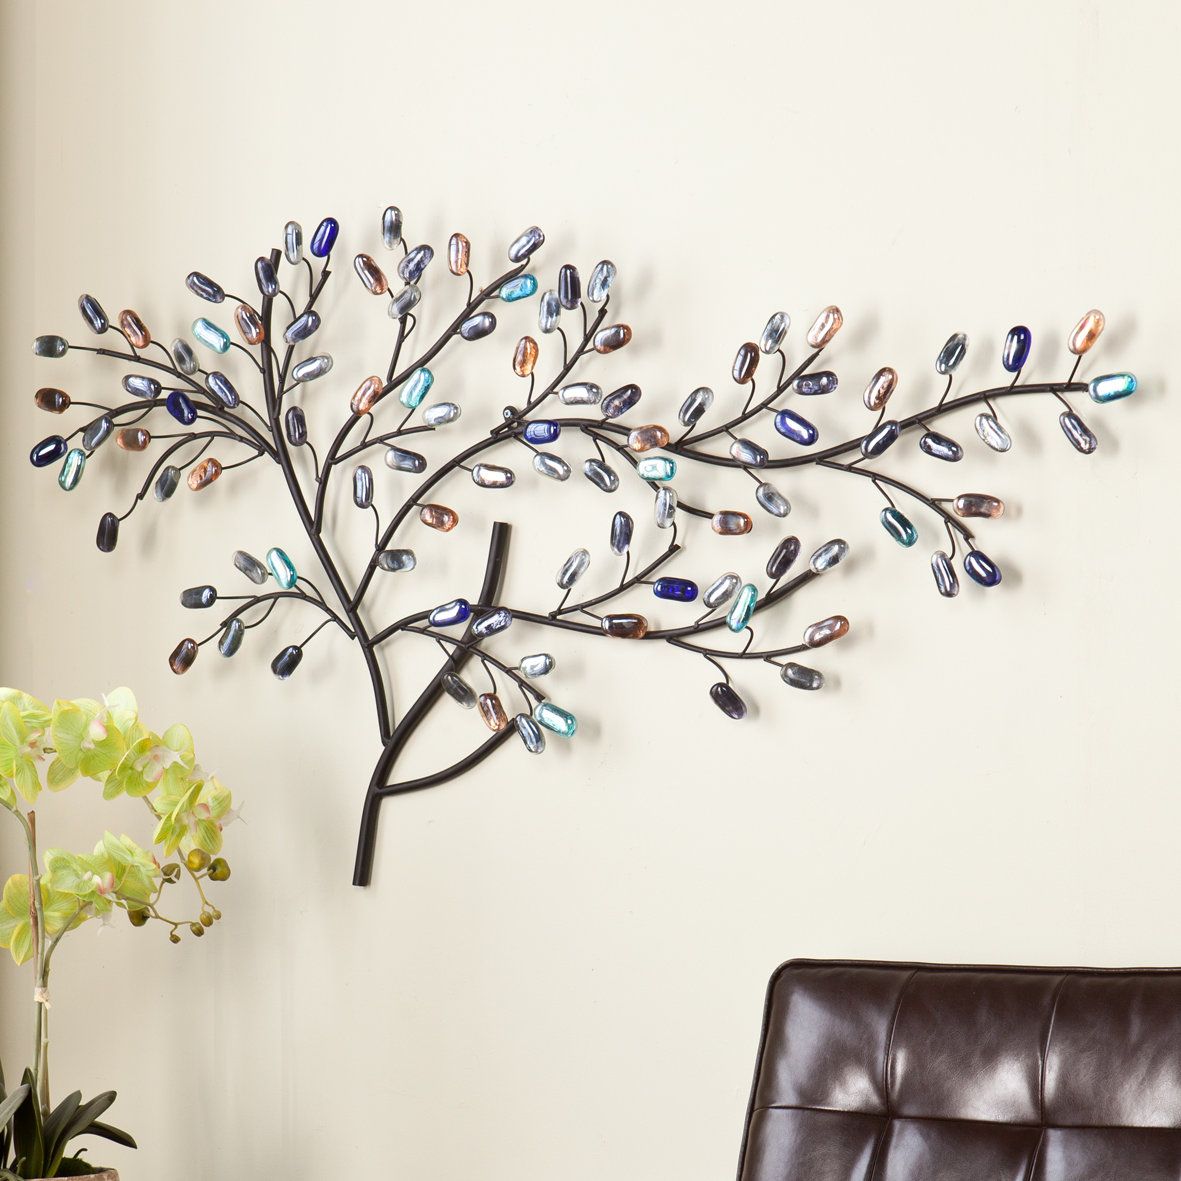 World Menagerie Metal Wall Art You'll Love In 2019 | Wayfair Within Wall Decor By World Menagerie (View 7 of 30)